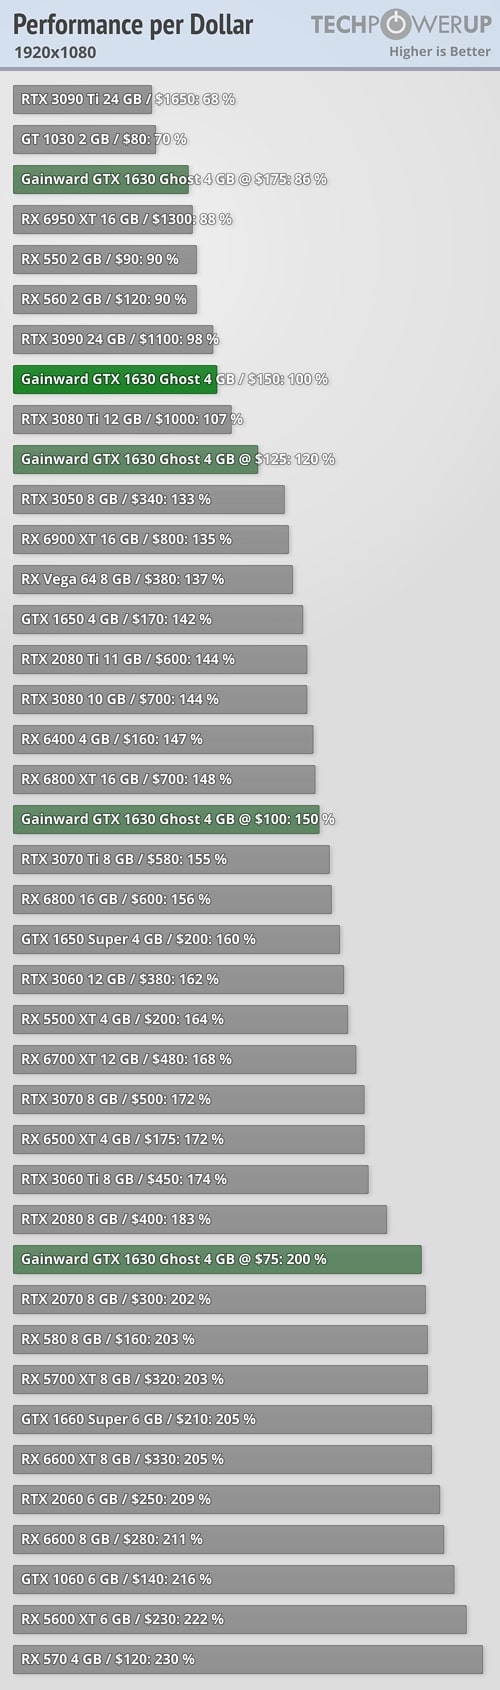 NVIDIA GTX 1630 test results out, even slower than AMD RX 6400